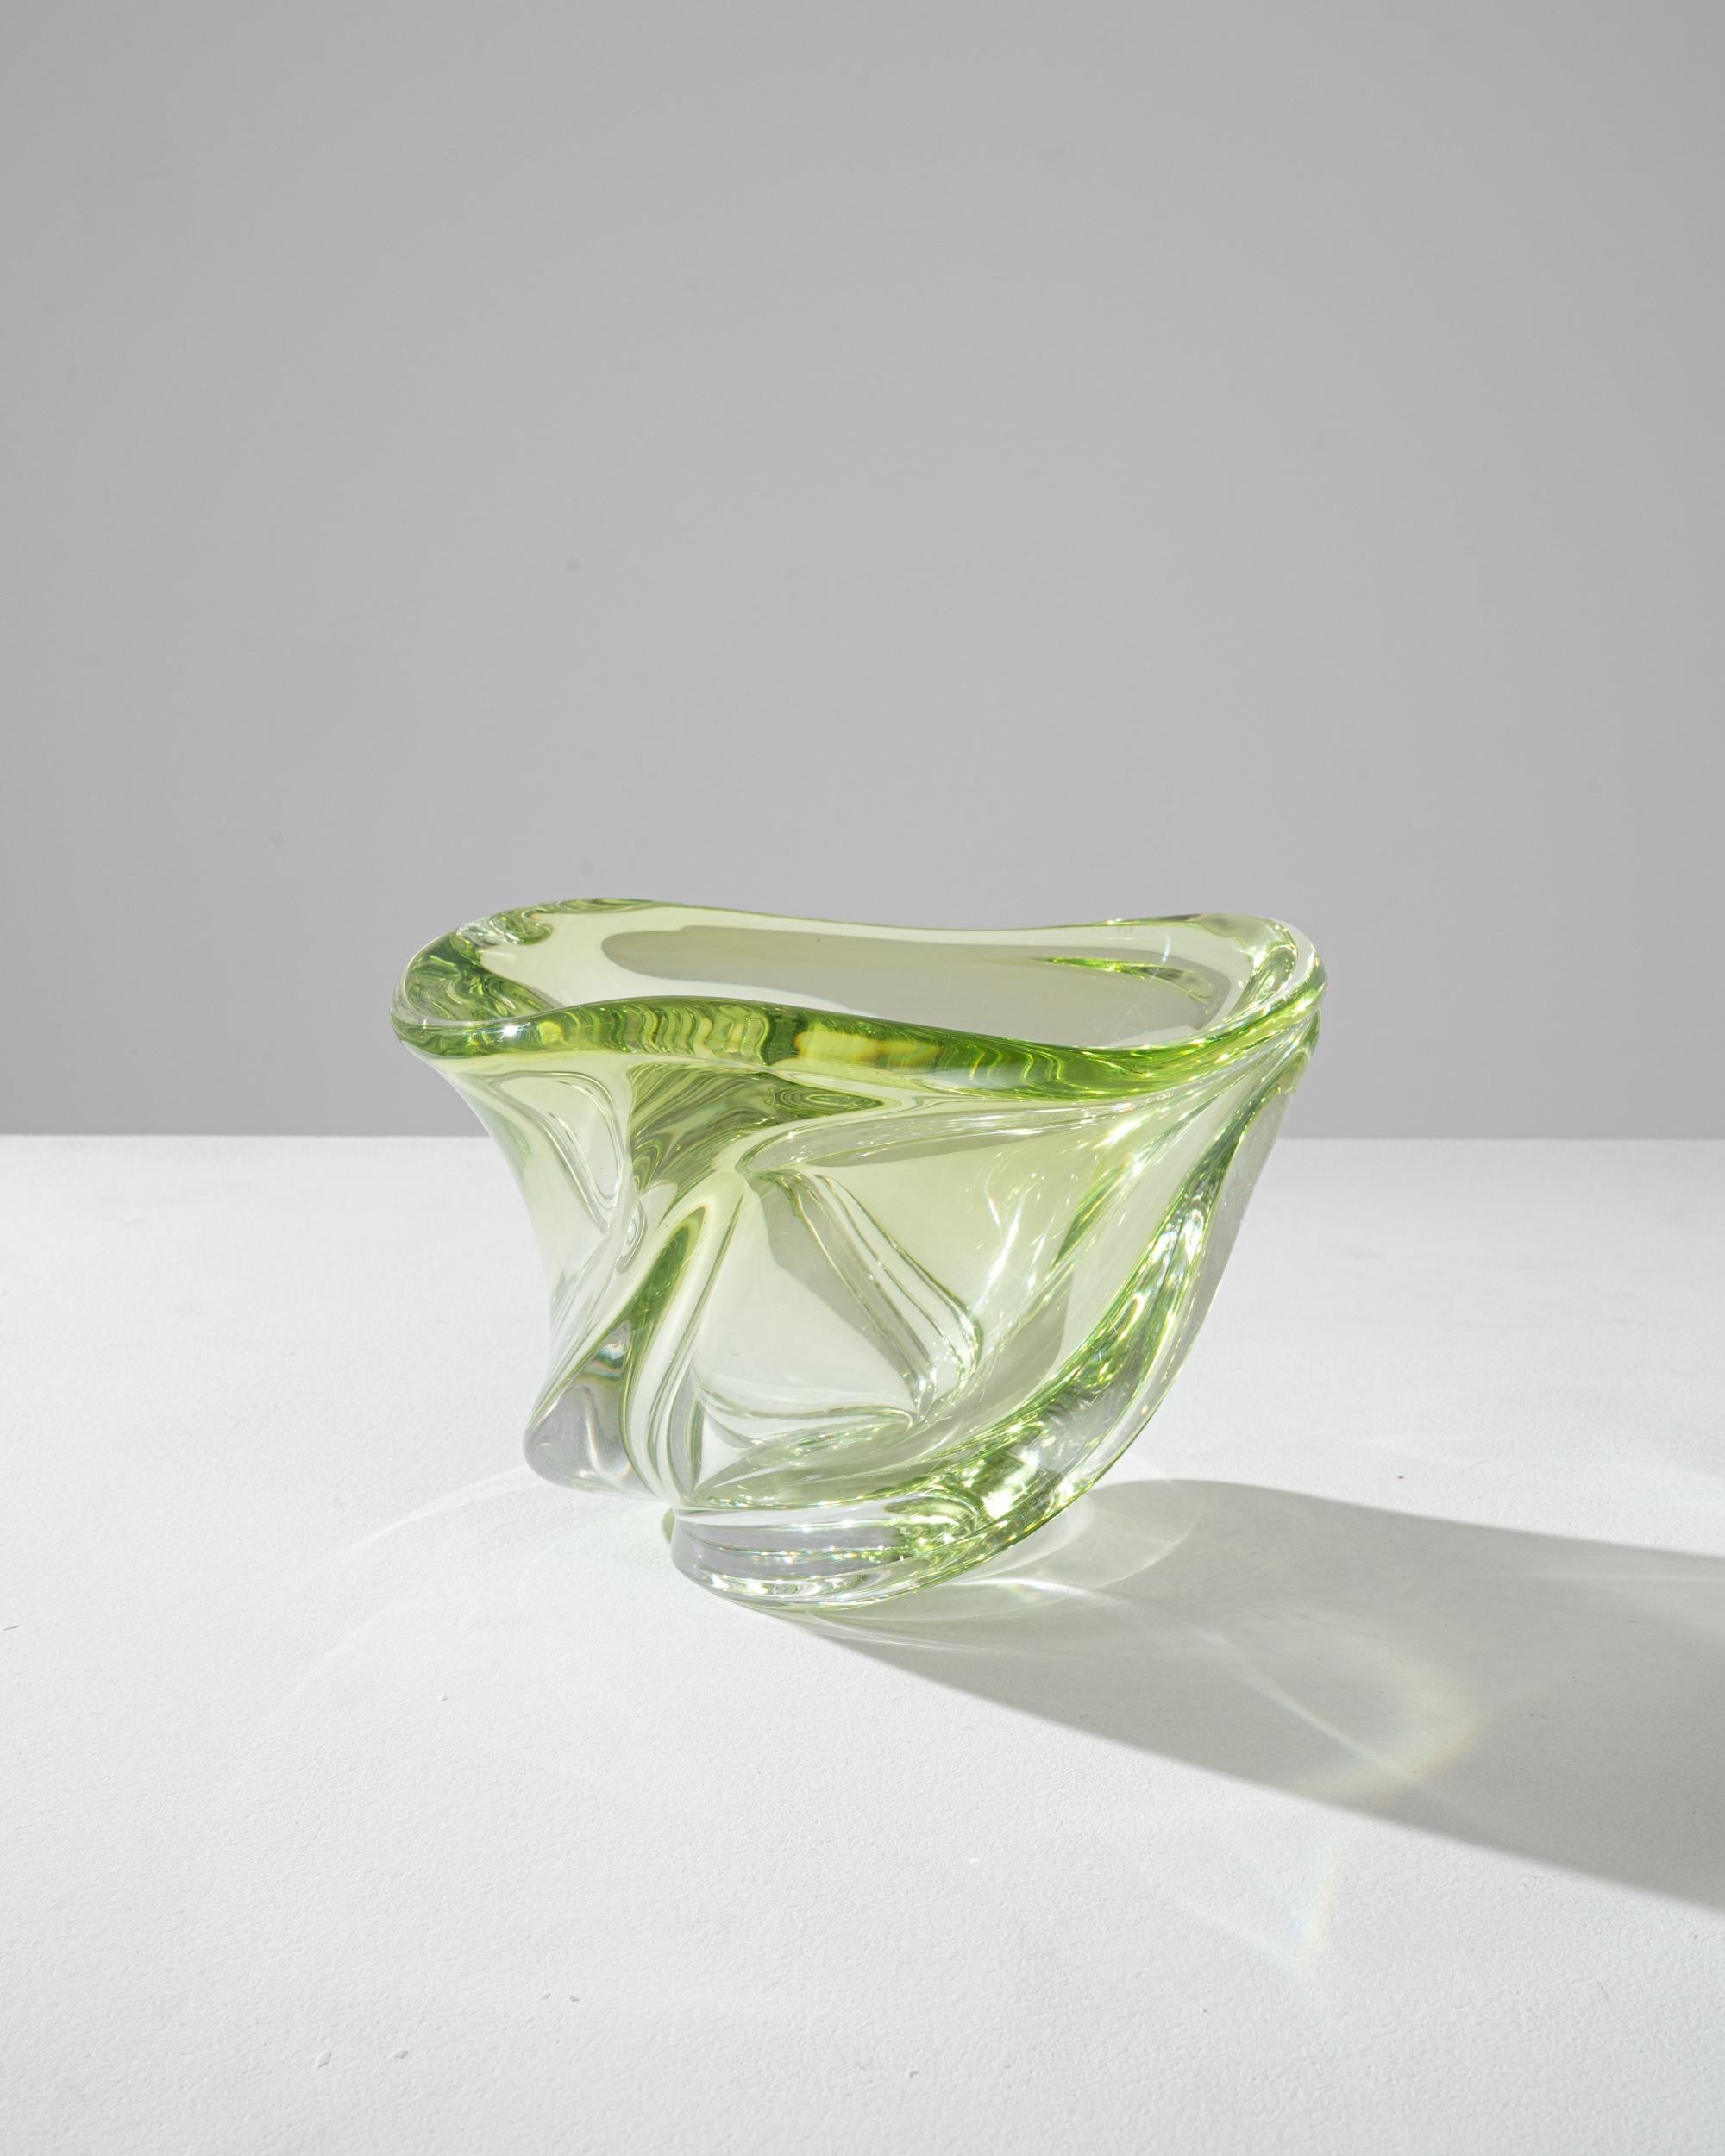 The vivid hues and liquid lines of blown art glass create an unmissable accent. Made in Belgium circa 1960, expressive glasswork forms a bold silhouette. Organic and abstract, reminiscent of a water droplet captured in slow motion. A luminous